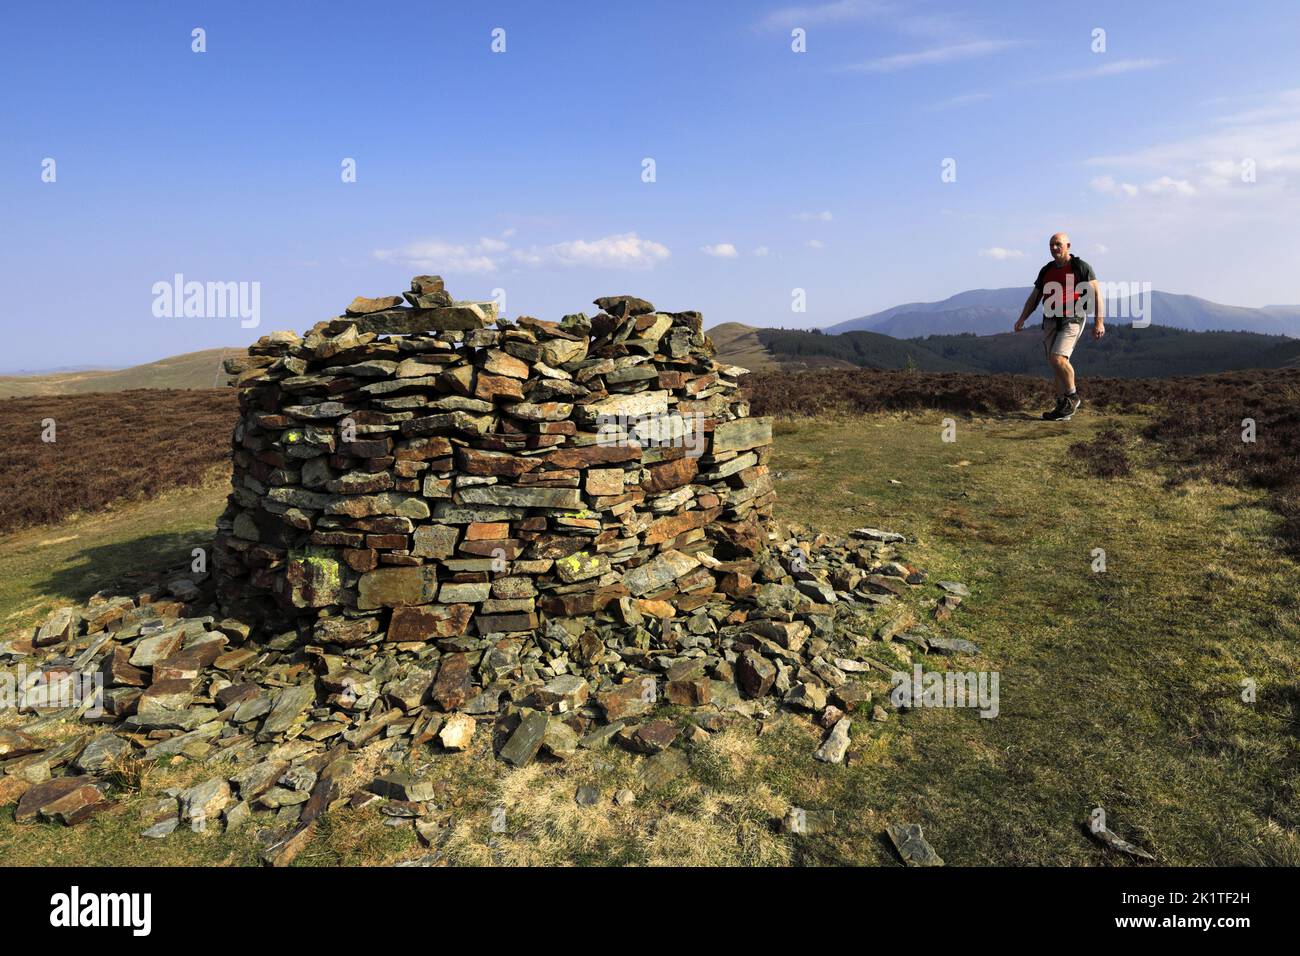 Walker at the summit of Whinlatter fell, Lake District National Park, Cumbria, England, UK Whinlatter fell is one of the 214 Wainwright fells. Stock Photo